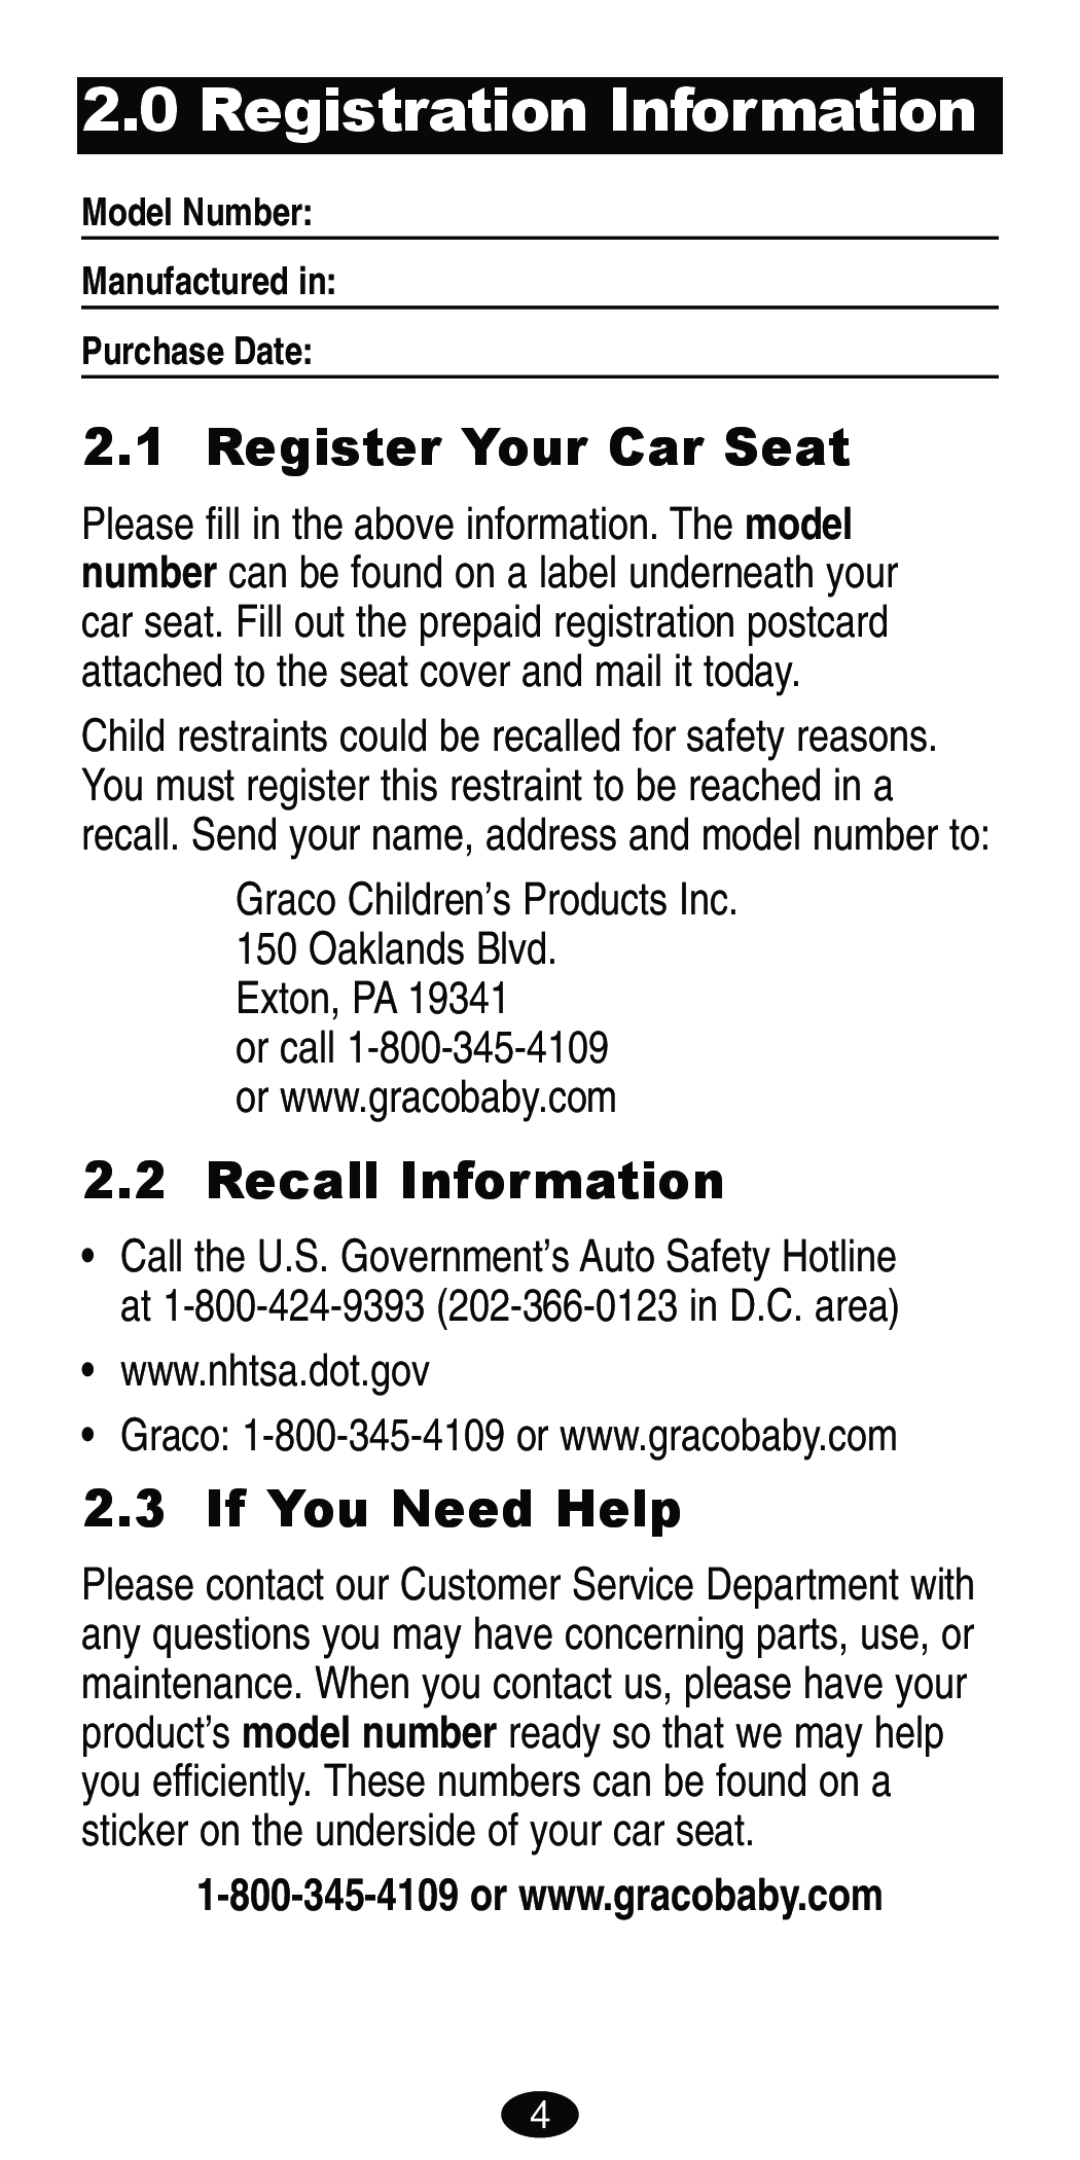 Graco Car Seat/Booster Registration Information, Register Your Car Seat, Recall Information, If You Need Help, Exton, PA 